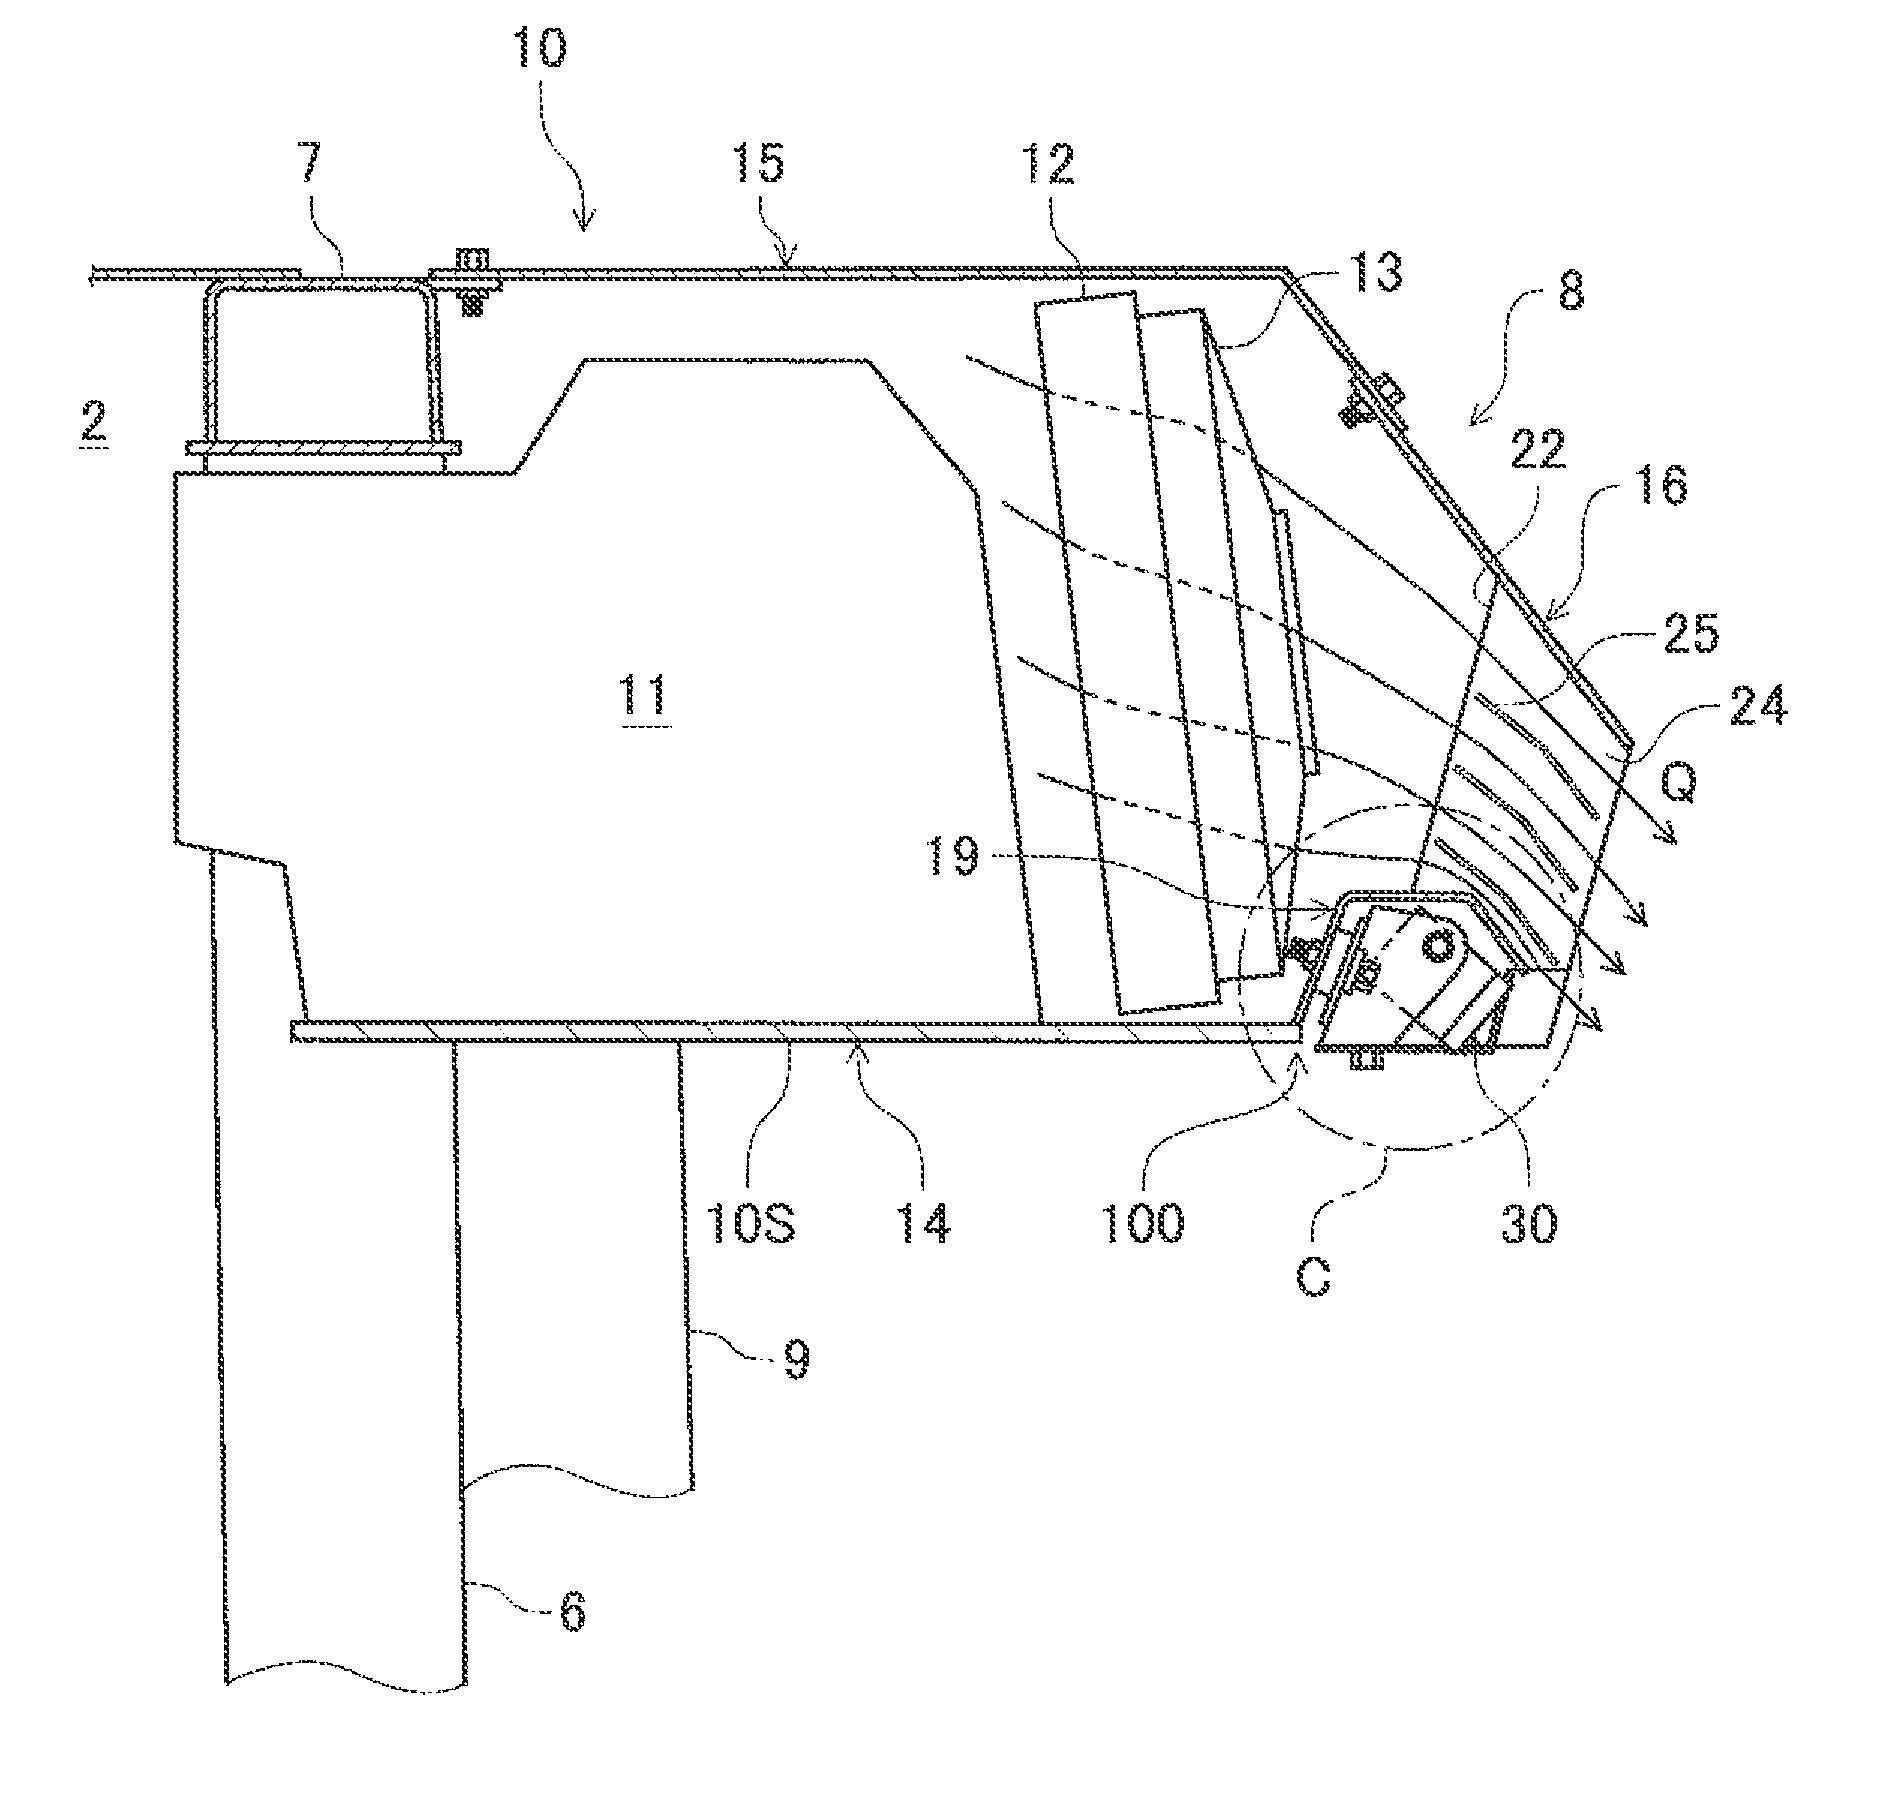 Work vehicle equipped with rear monitoring camera apparatus